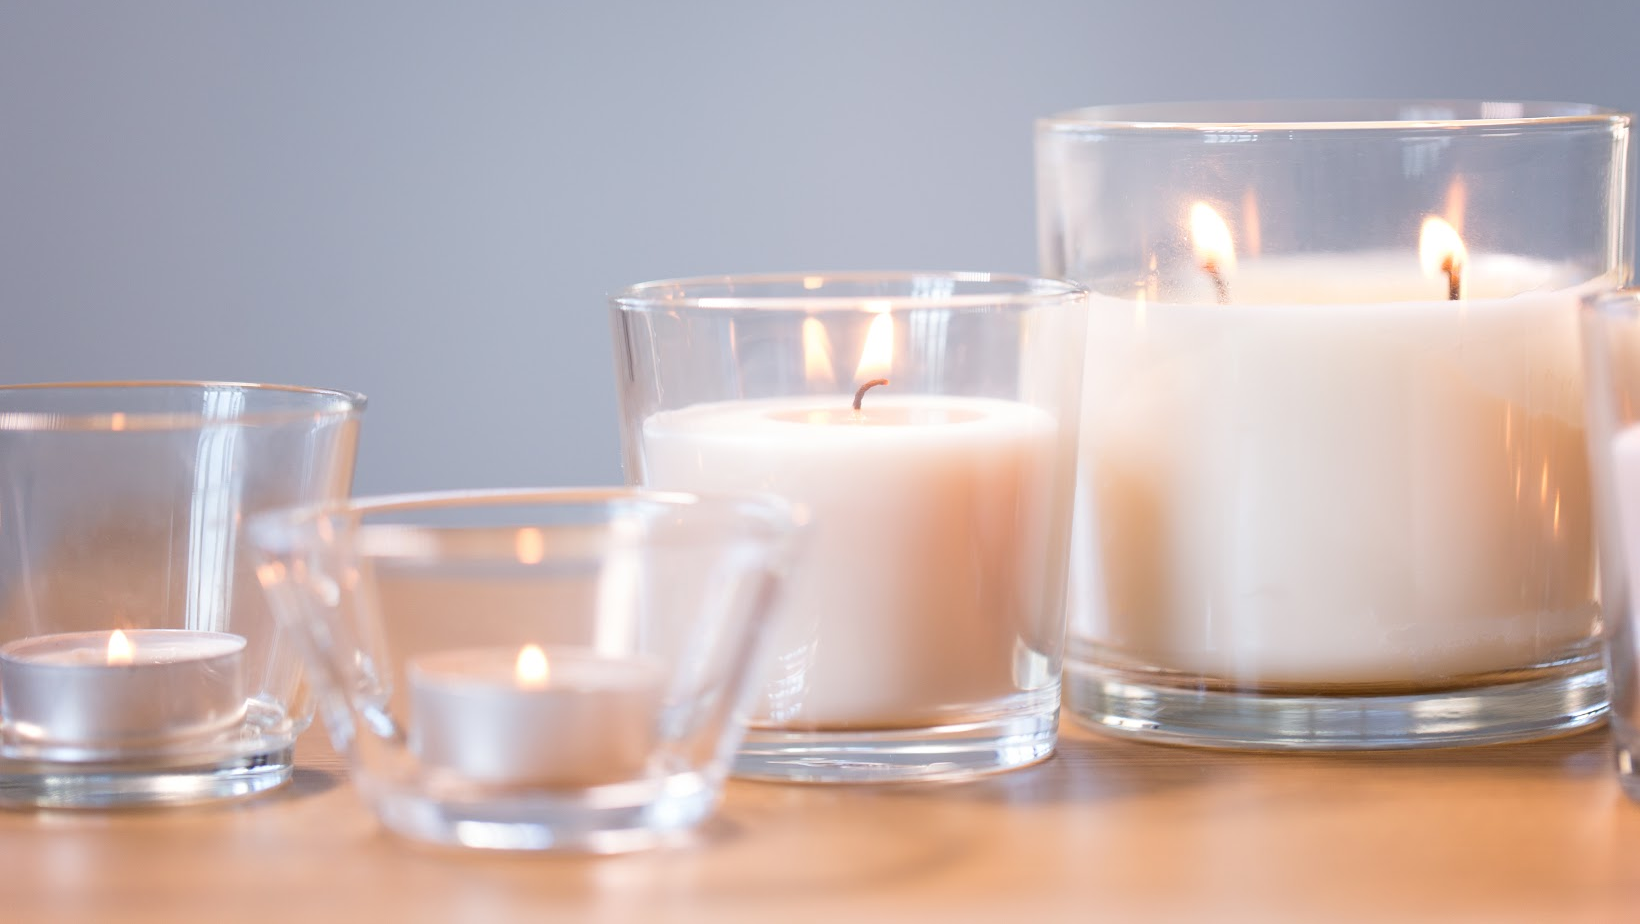 Light Up Your Evening-DIY Floating Candles Centerpiece - Learn How To Make  Soy Candles at Home